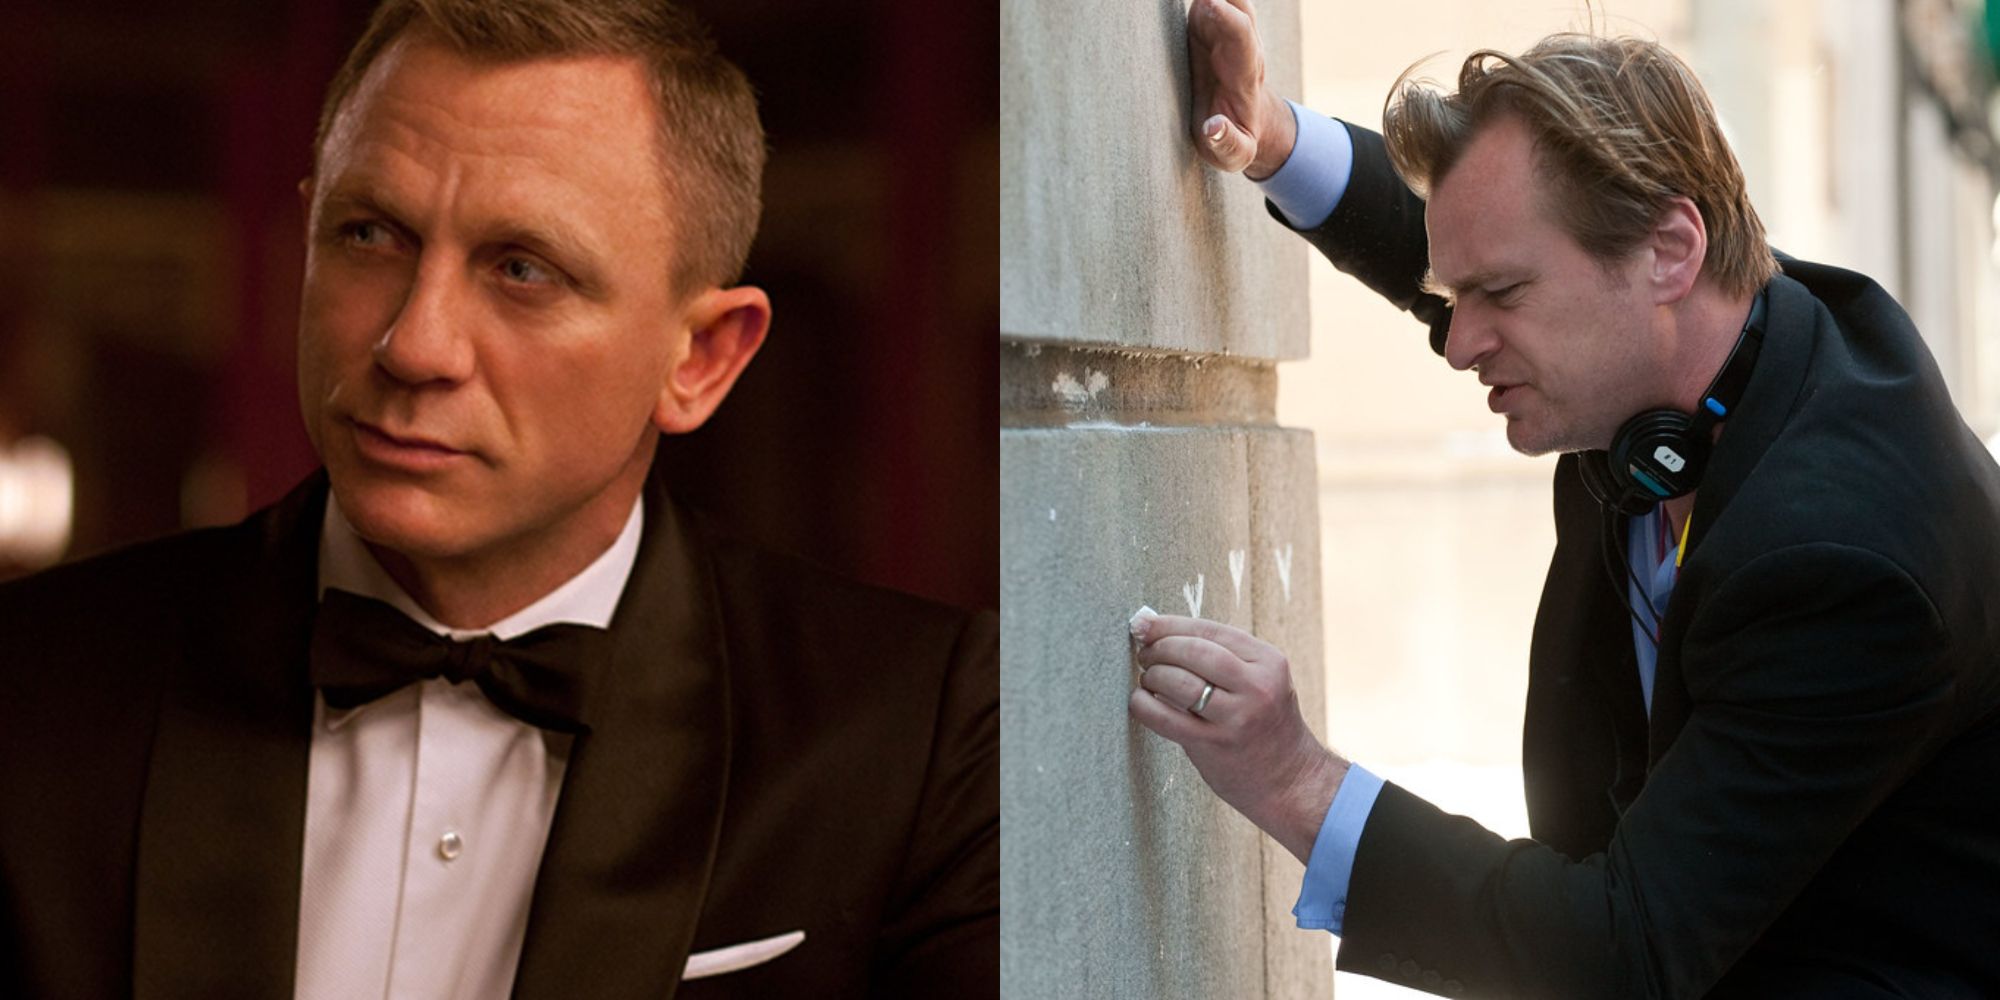 Split images of Daniel Craig wearing a suit in Casino Royale and Christopher Nolan on the set of The Dark Knight RIses